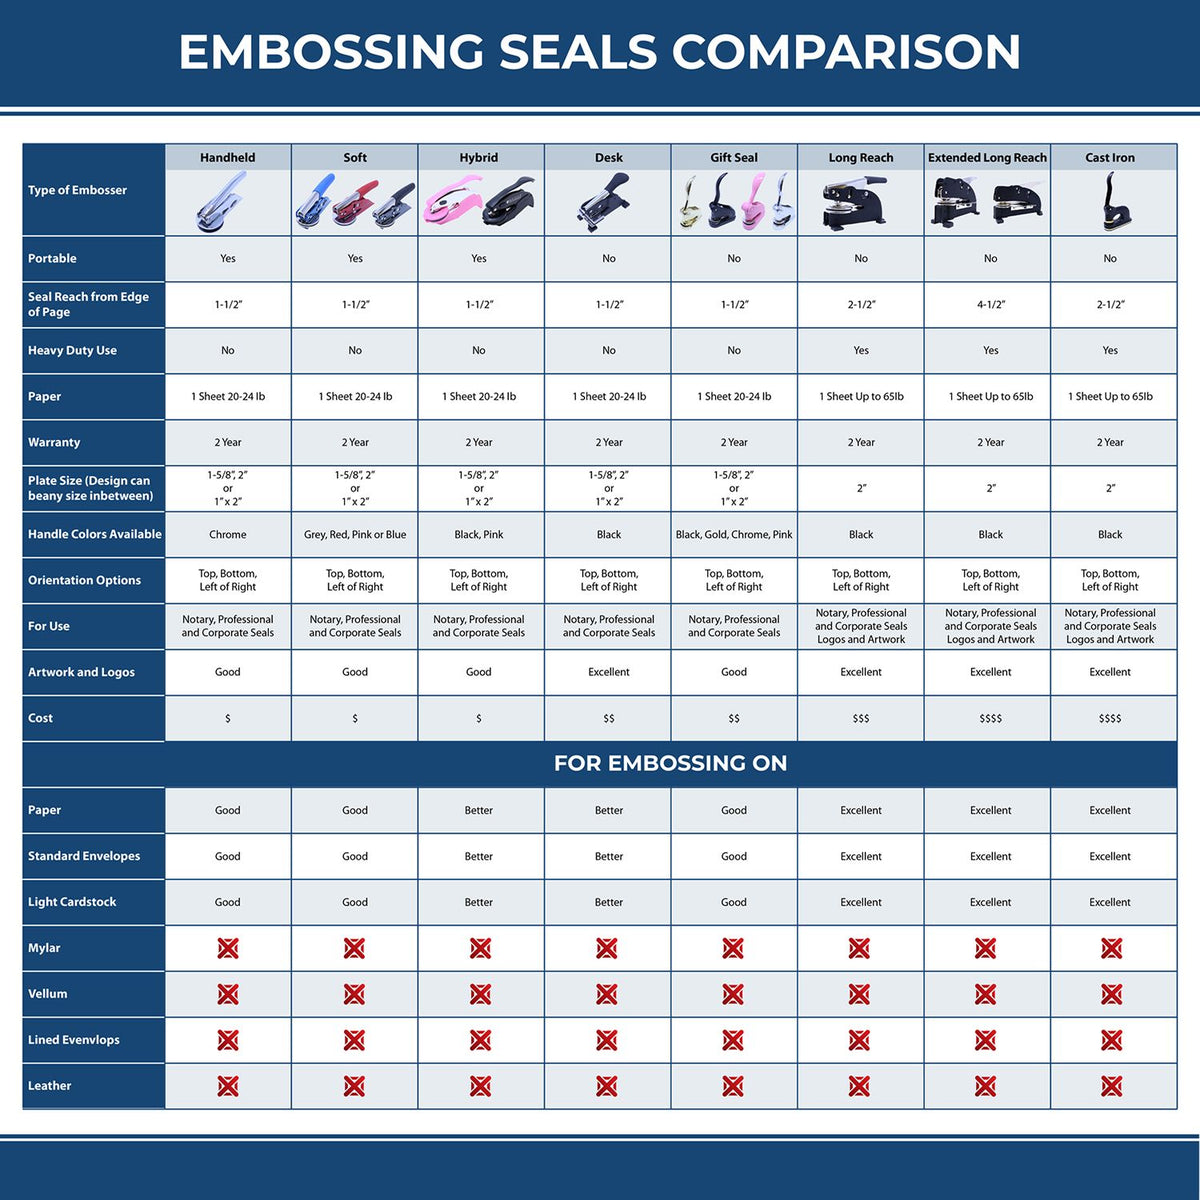 A comparison chart for the different types of mount models available for the Handheld Minnesota Architect Seal Embosser.